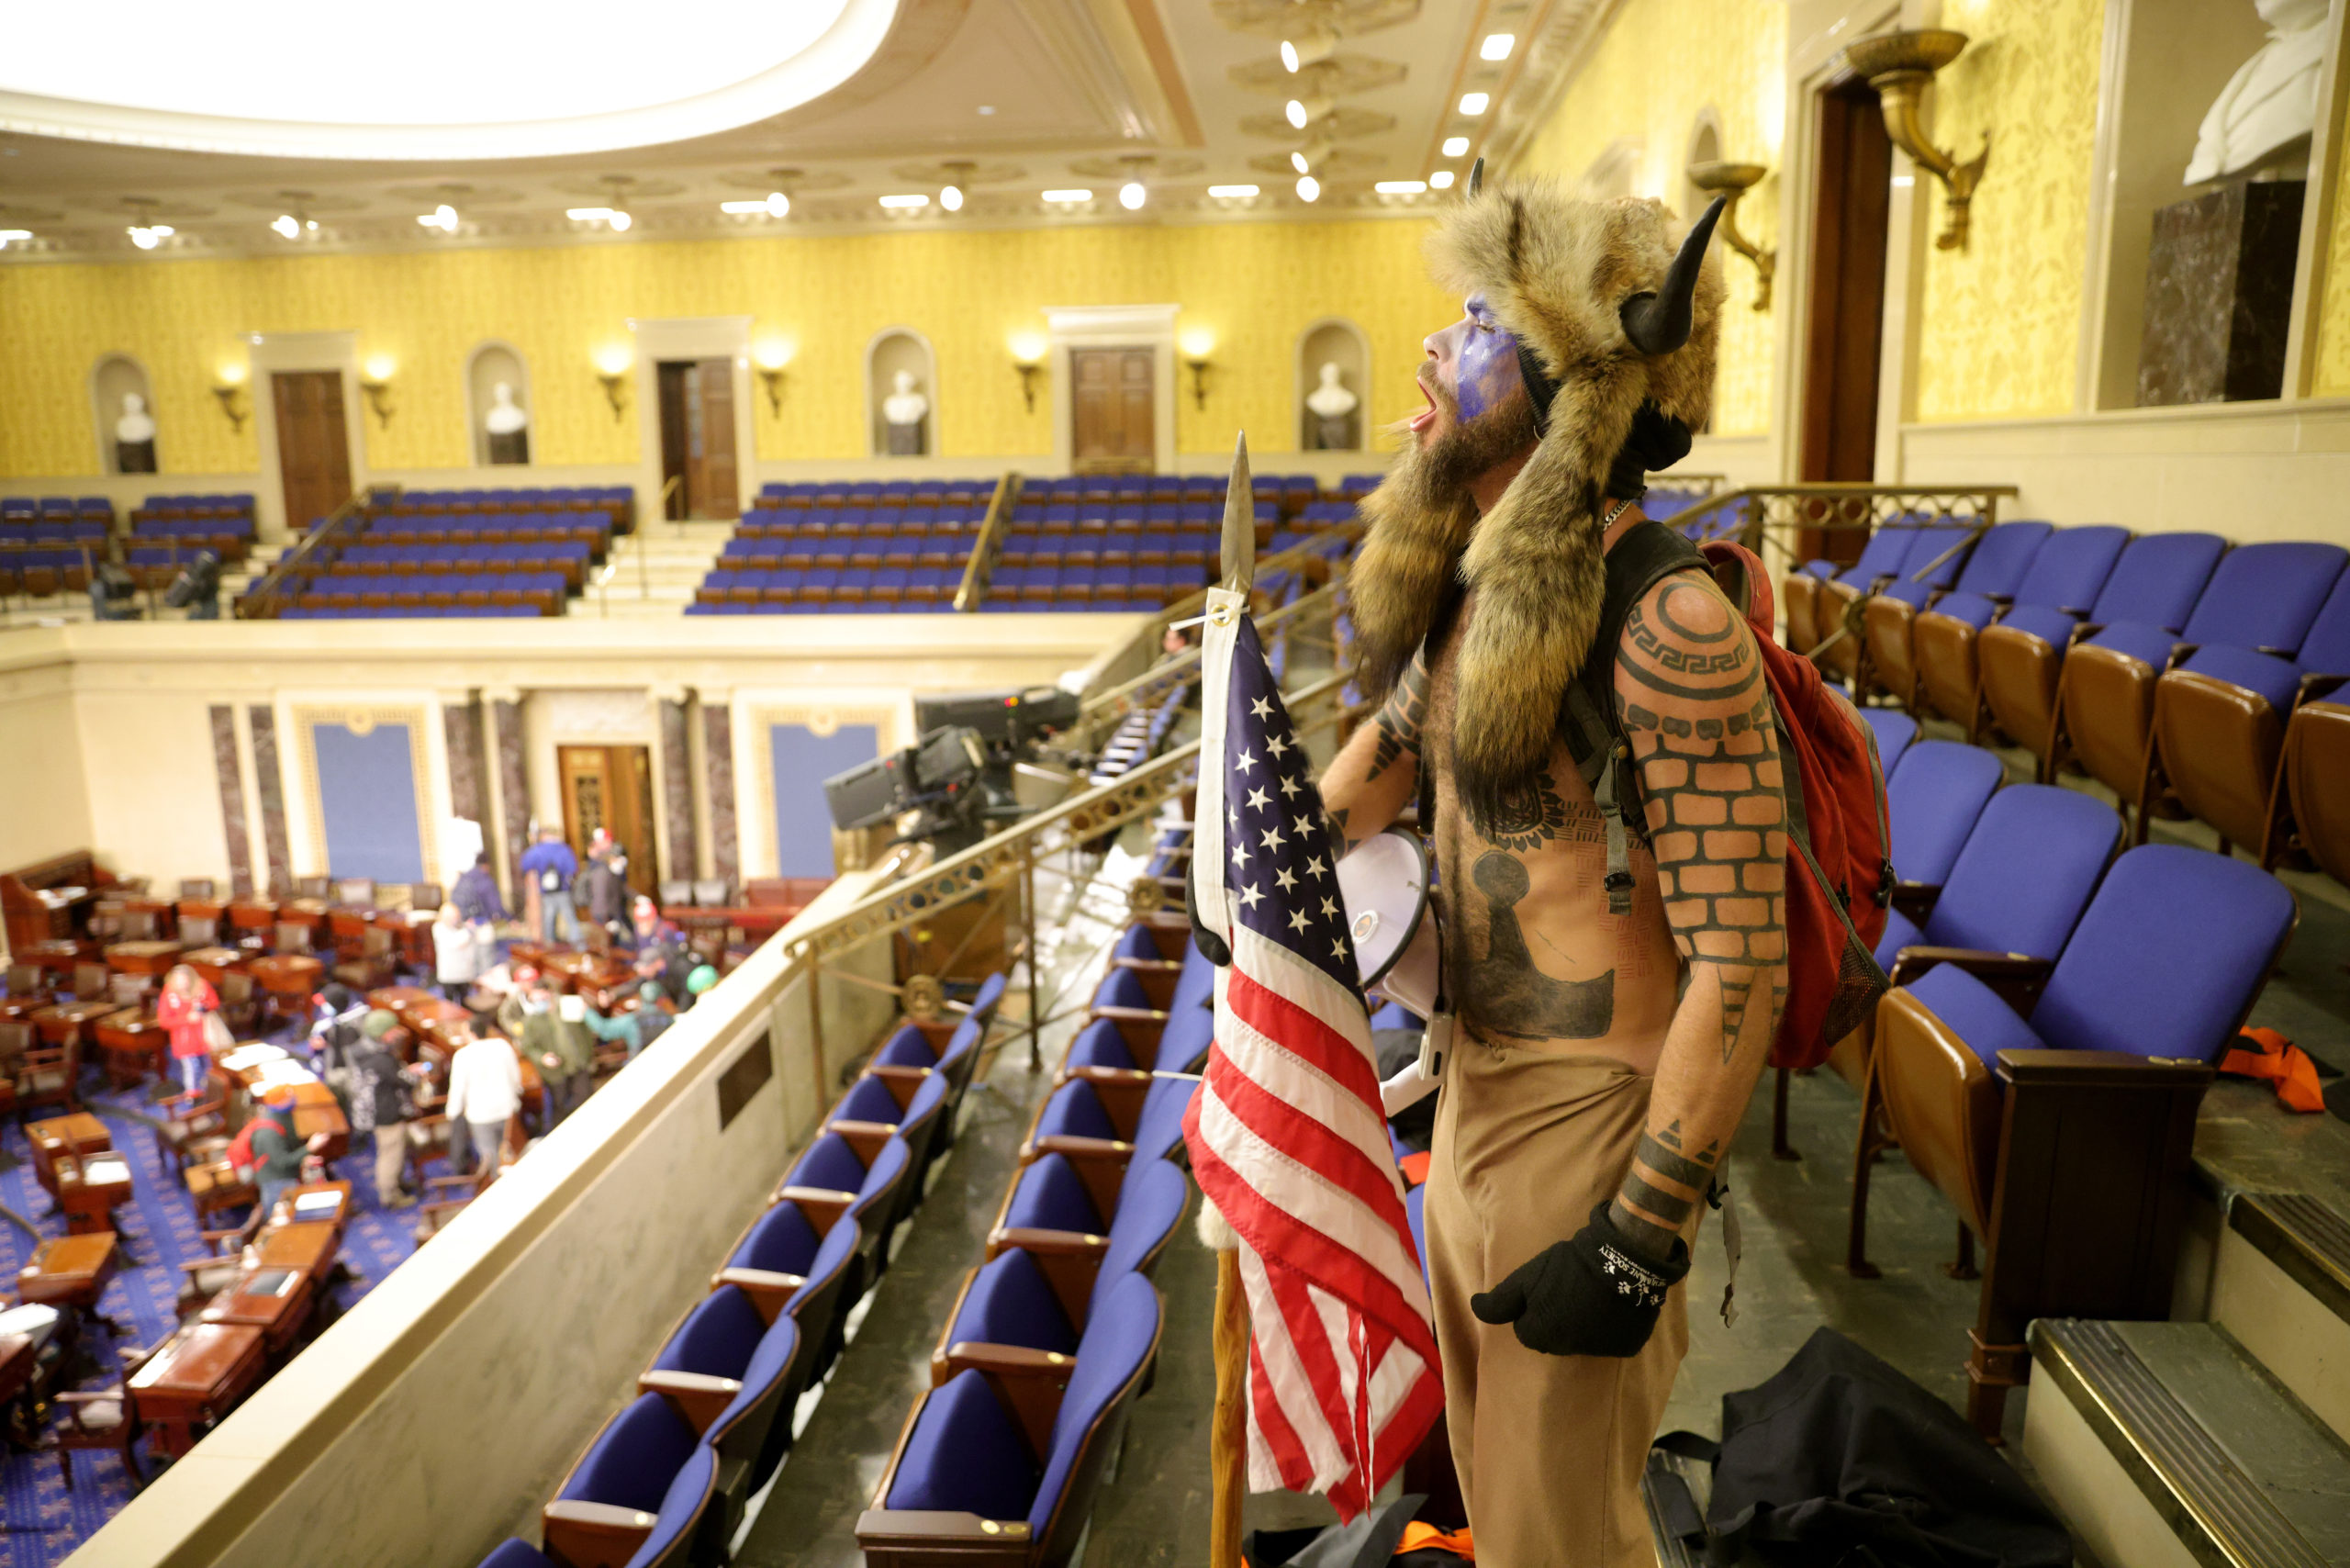 WASHINGTON, DC - JANUARY 06: A protester yells inside the Senate Chamber on January 06, 2021 in Washington, DC. Congress held a joint session today to ratify President-elect Joe Biden's 306-232 Electoral College win over President Donald Trump. Pro-Trump protesters entered the U.S. Capitol building during mass demonstrations in the nation's capital. (Photo by Win McNamee/Getty Images)